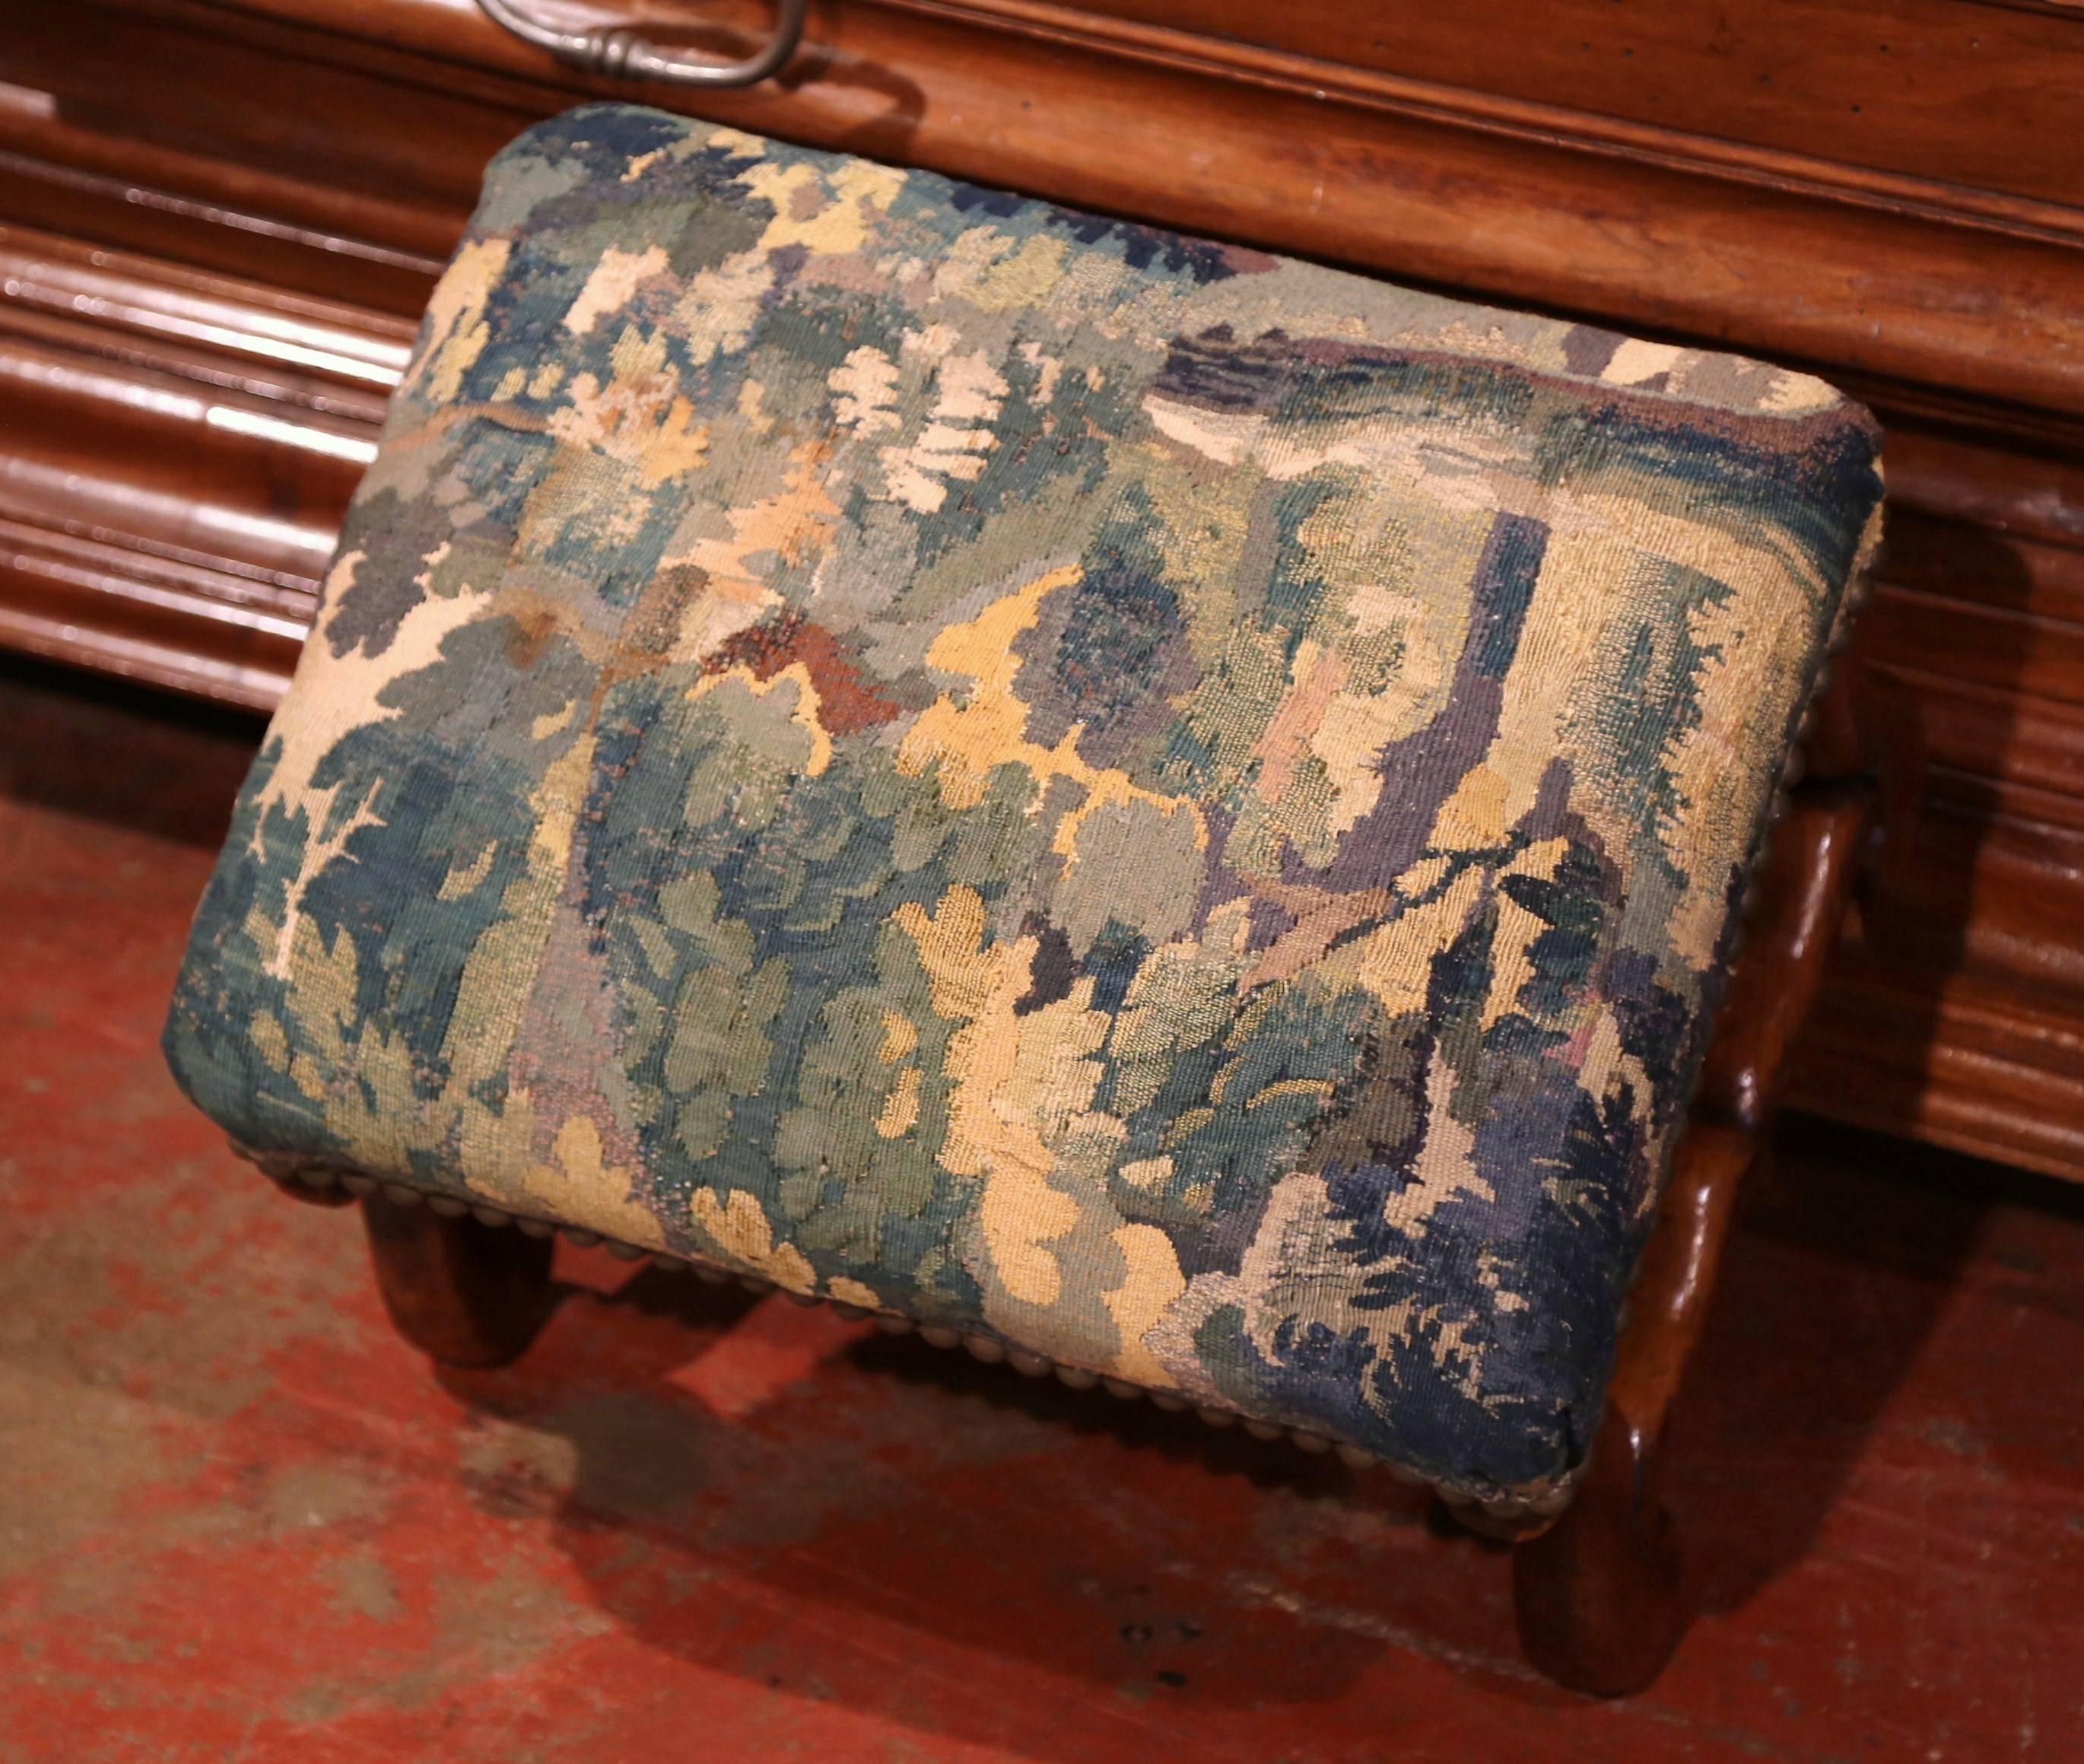 Patinated 19th Century French Carved Walnut Footstool with 18th Century Aubusson Tapestry